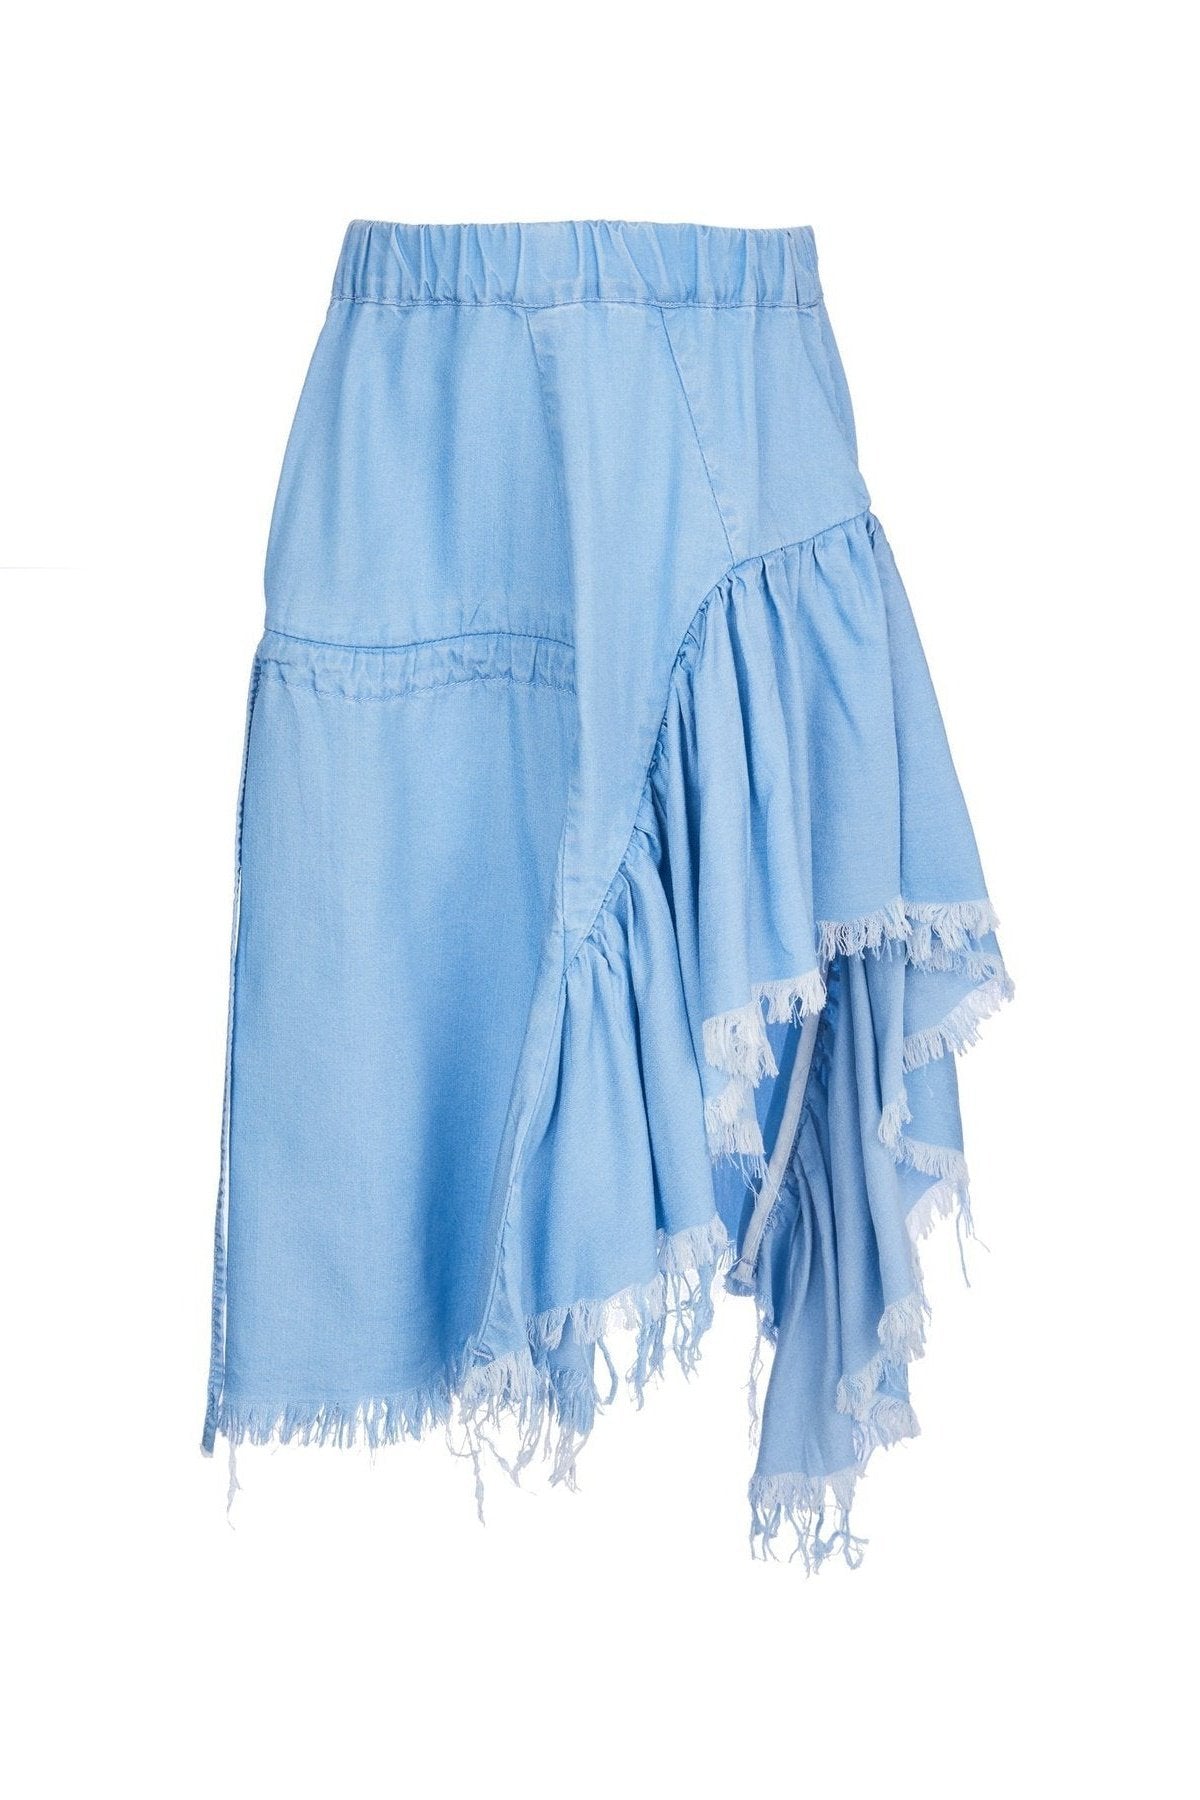 M'A KIDS GATHERED SKIRT IN BABY BLUE